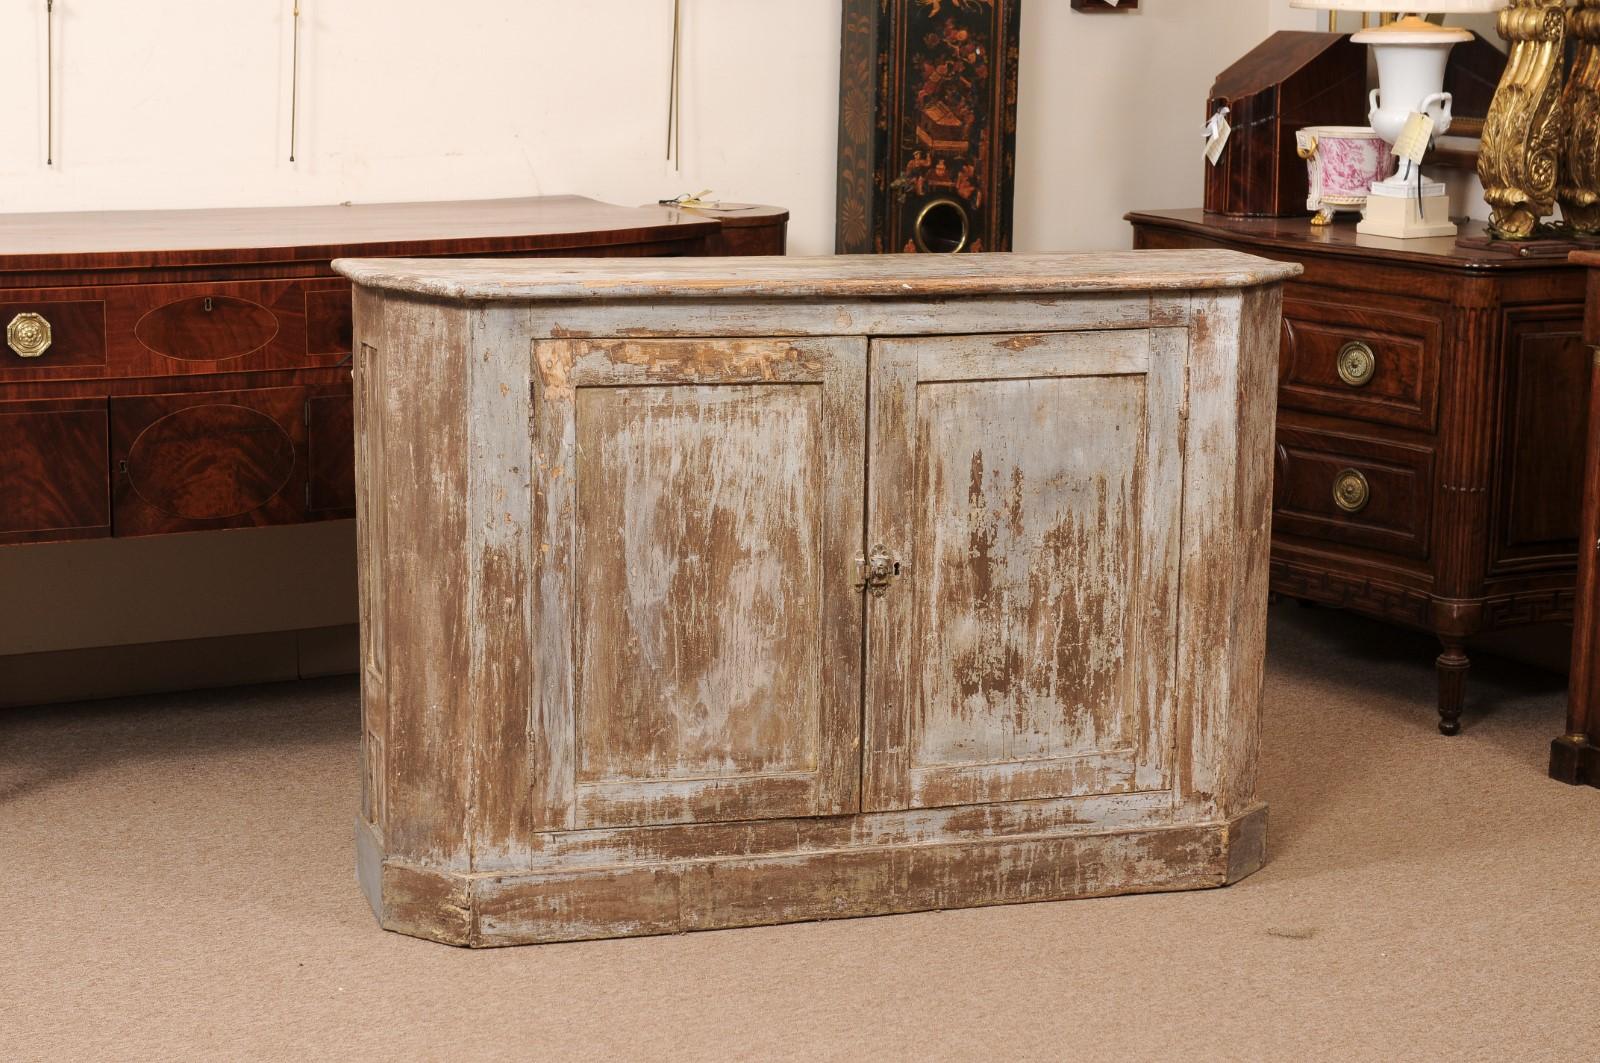 19th Century Italian Distressed Painted Credenza with Canted Sides & 2 Paneled Cabinet Doors